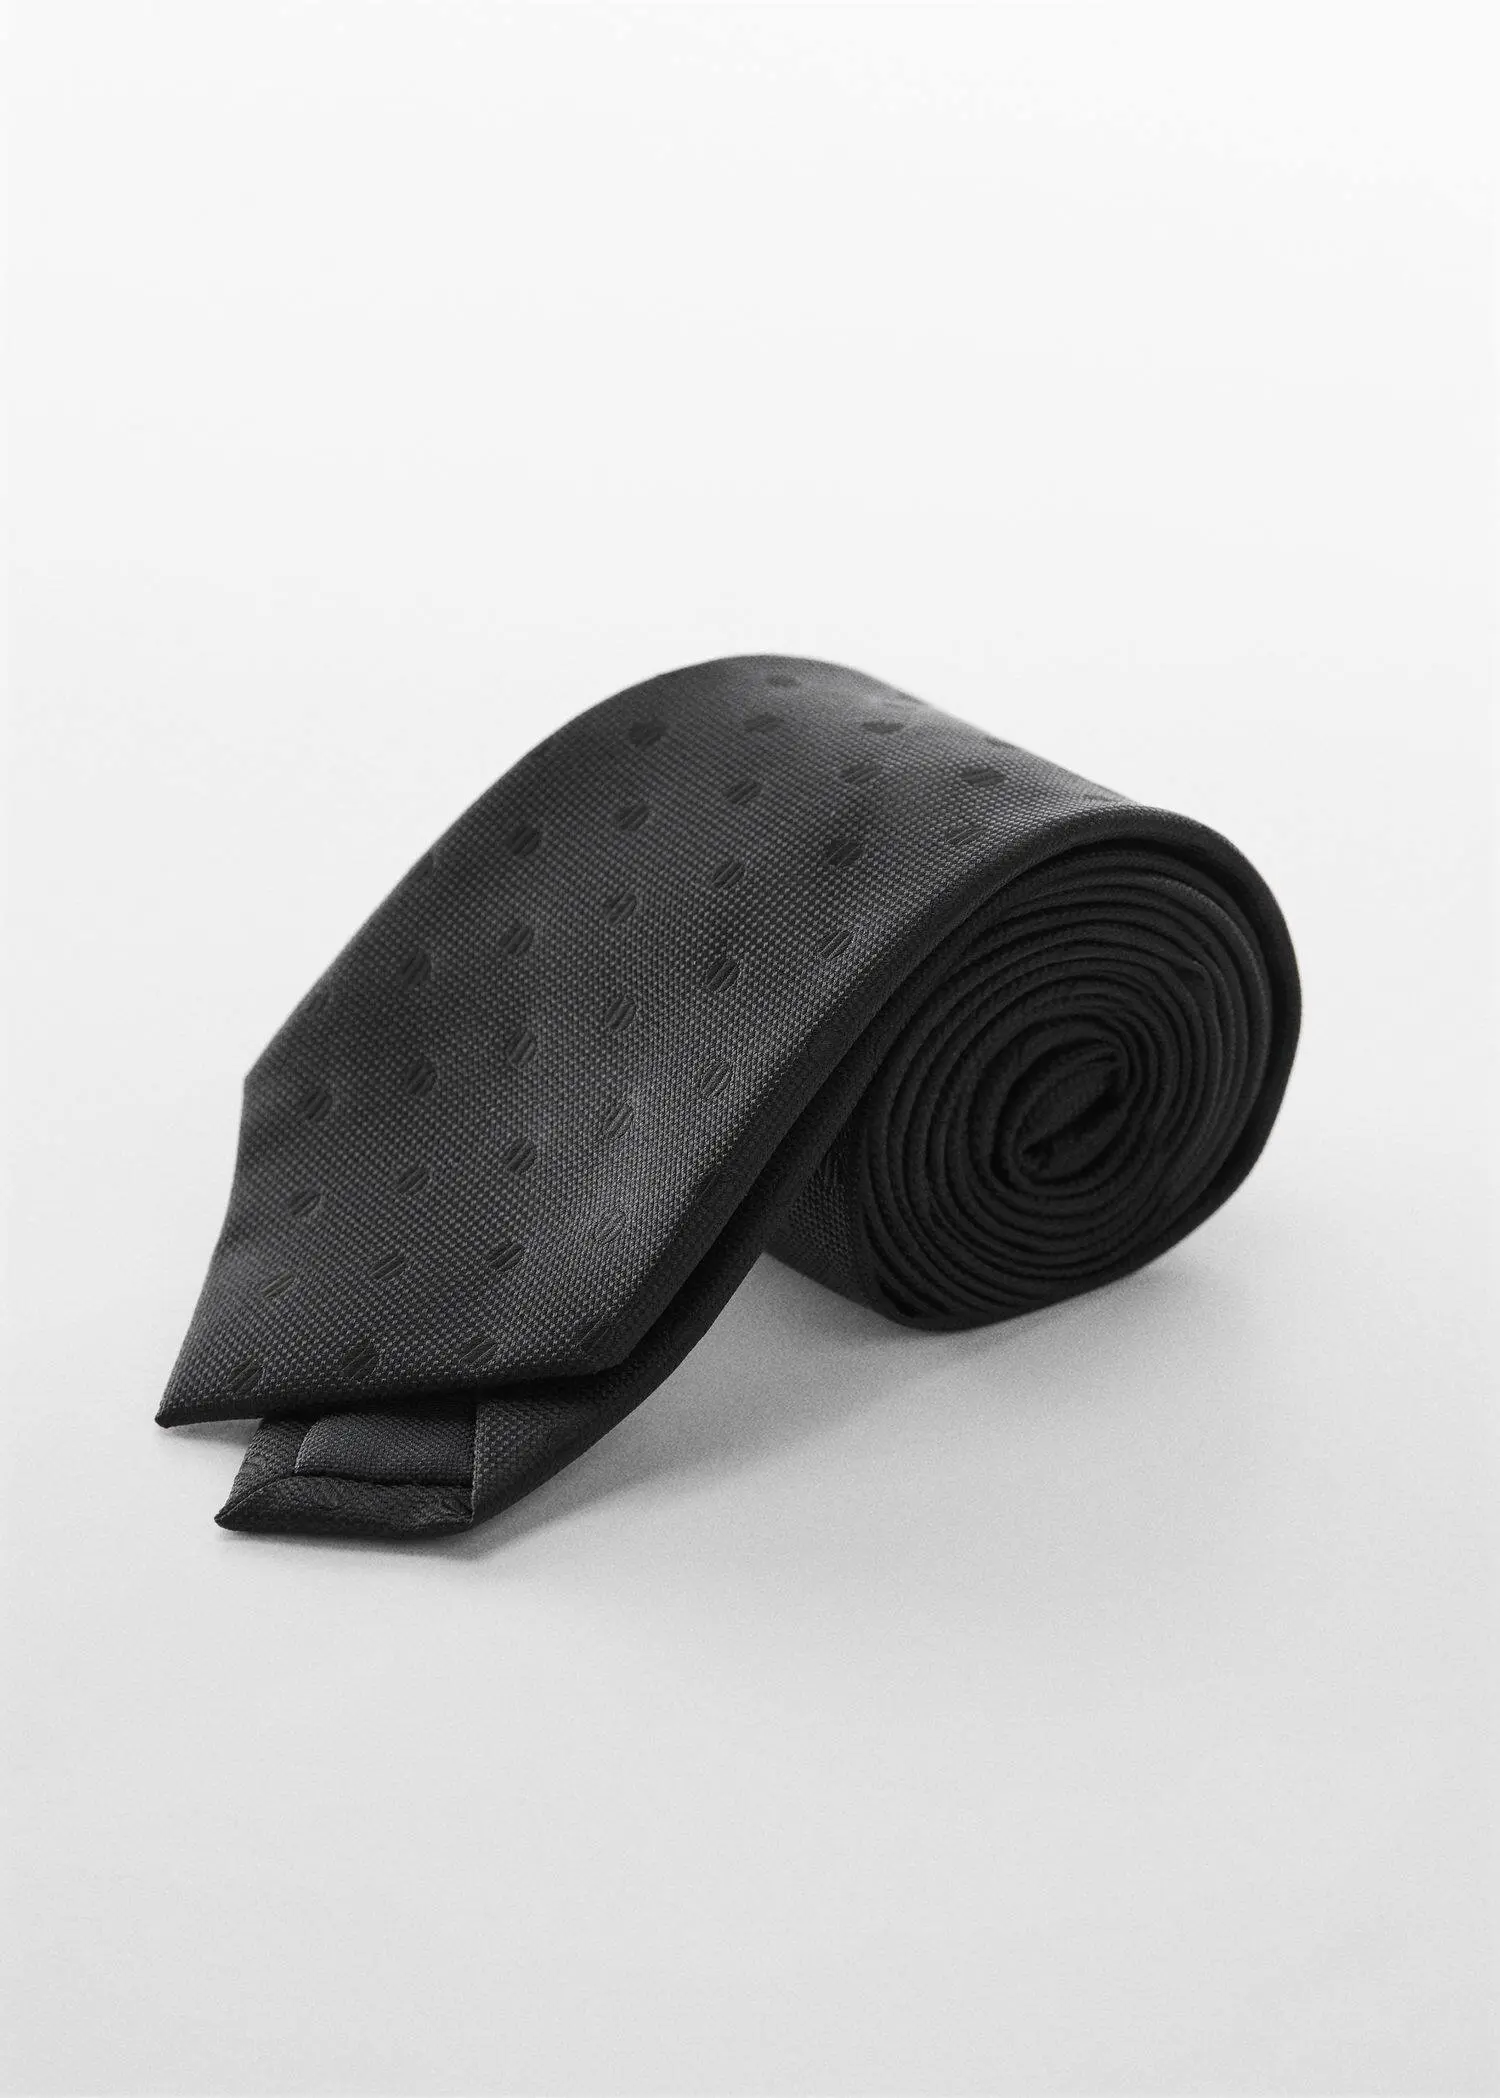 Mango Micro-print tie. a black neck tie on top of a white surface. 